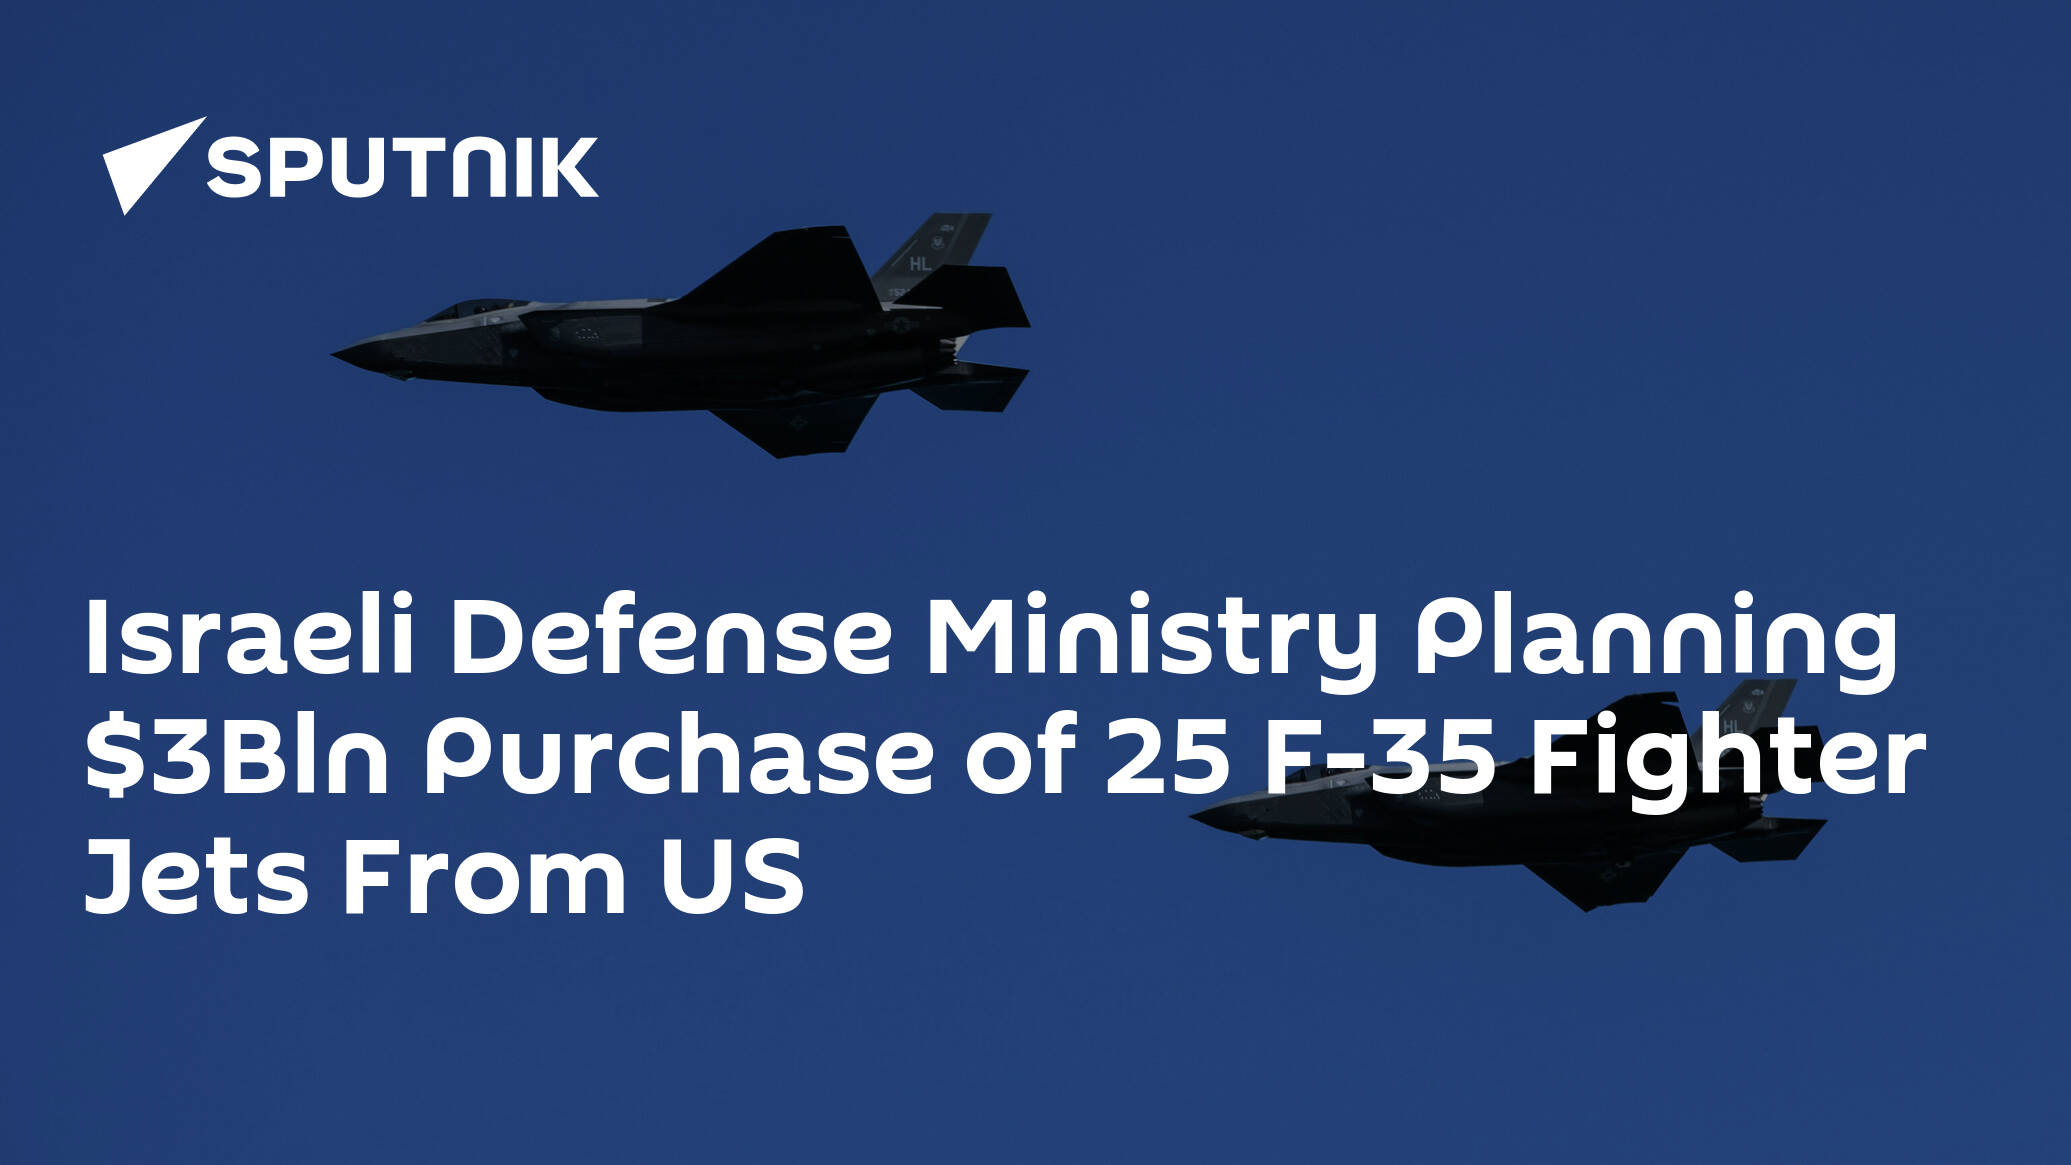 Israeli Defense Ministry Planning Bln Purchase of 25 F-35 Fighter Jets From US